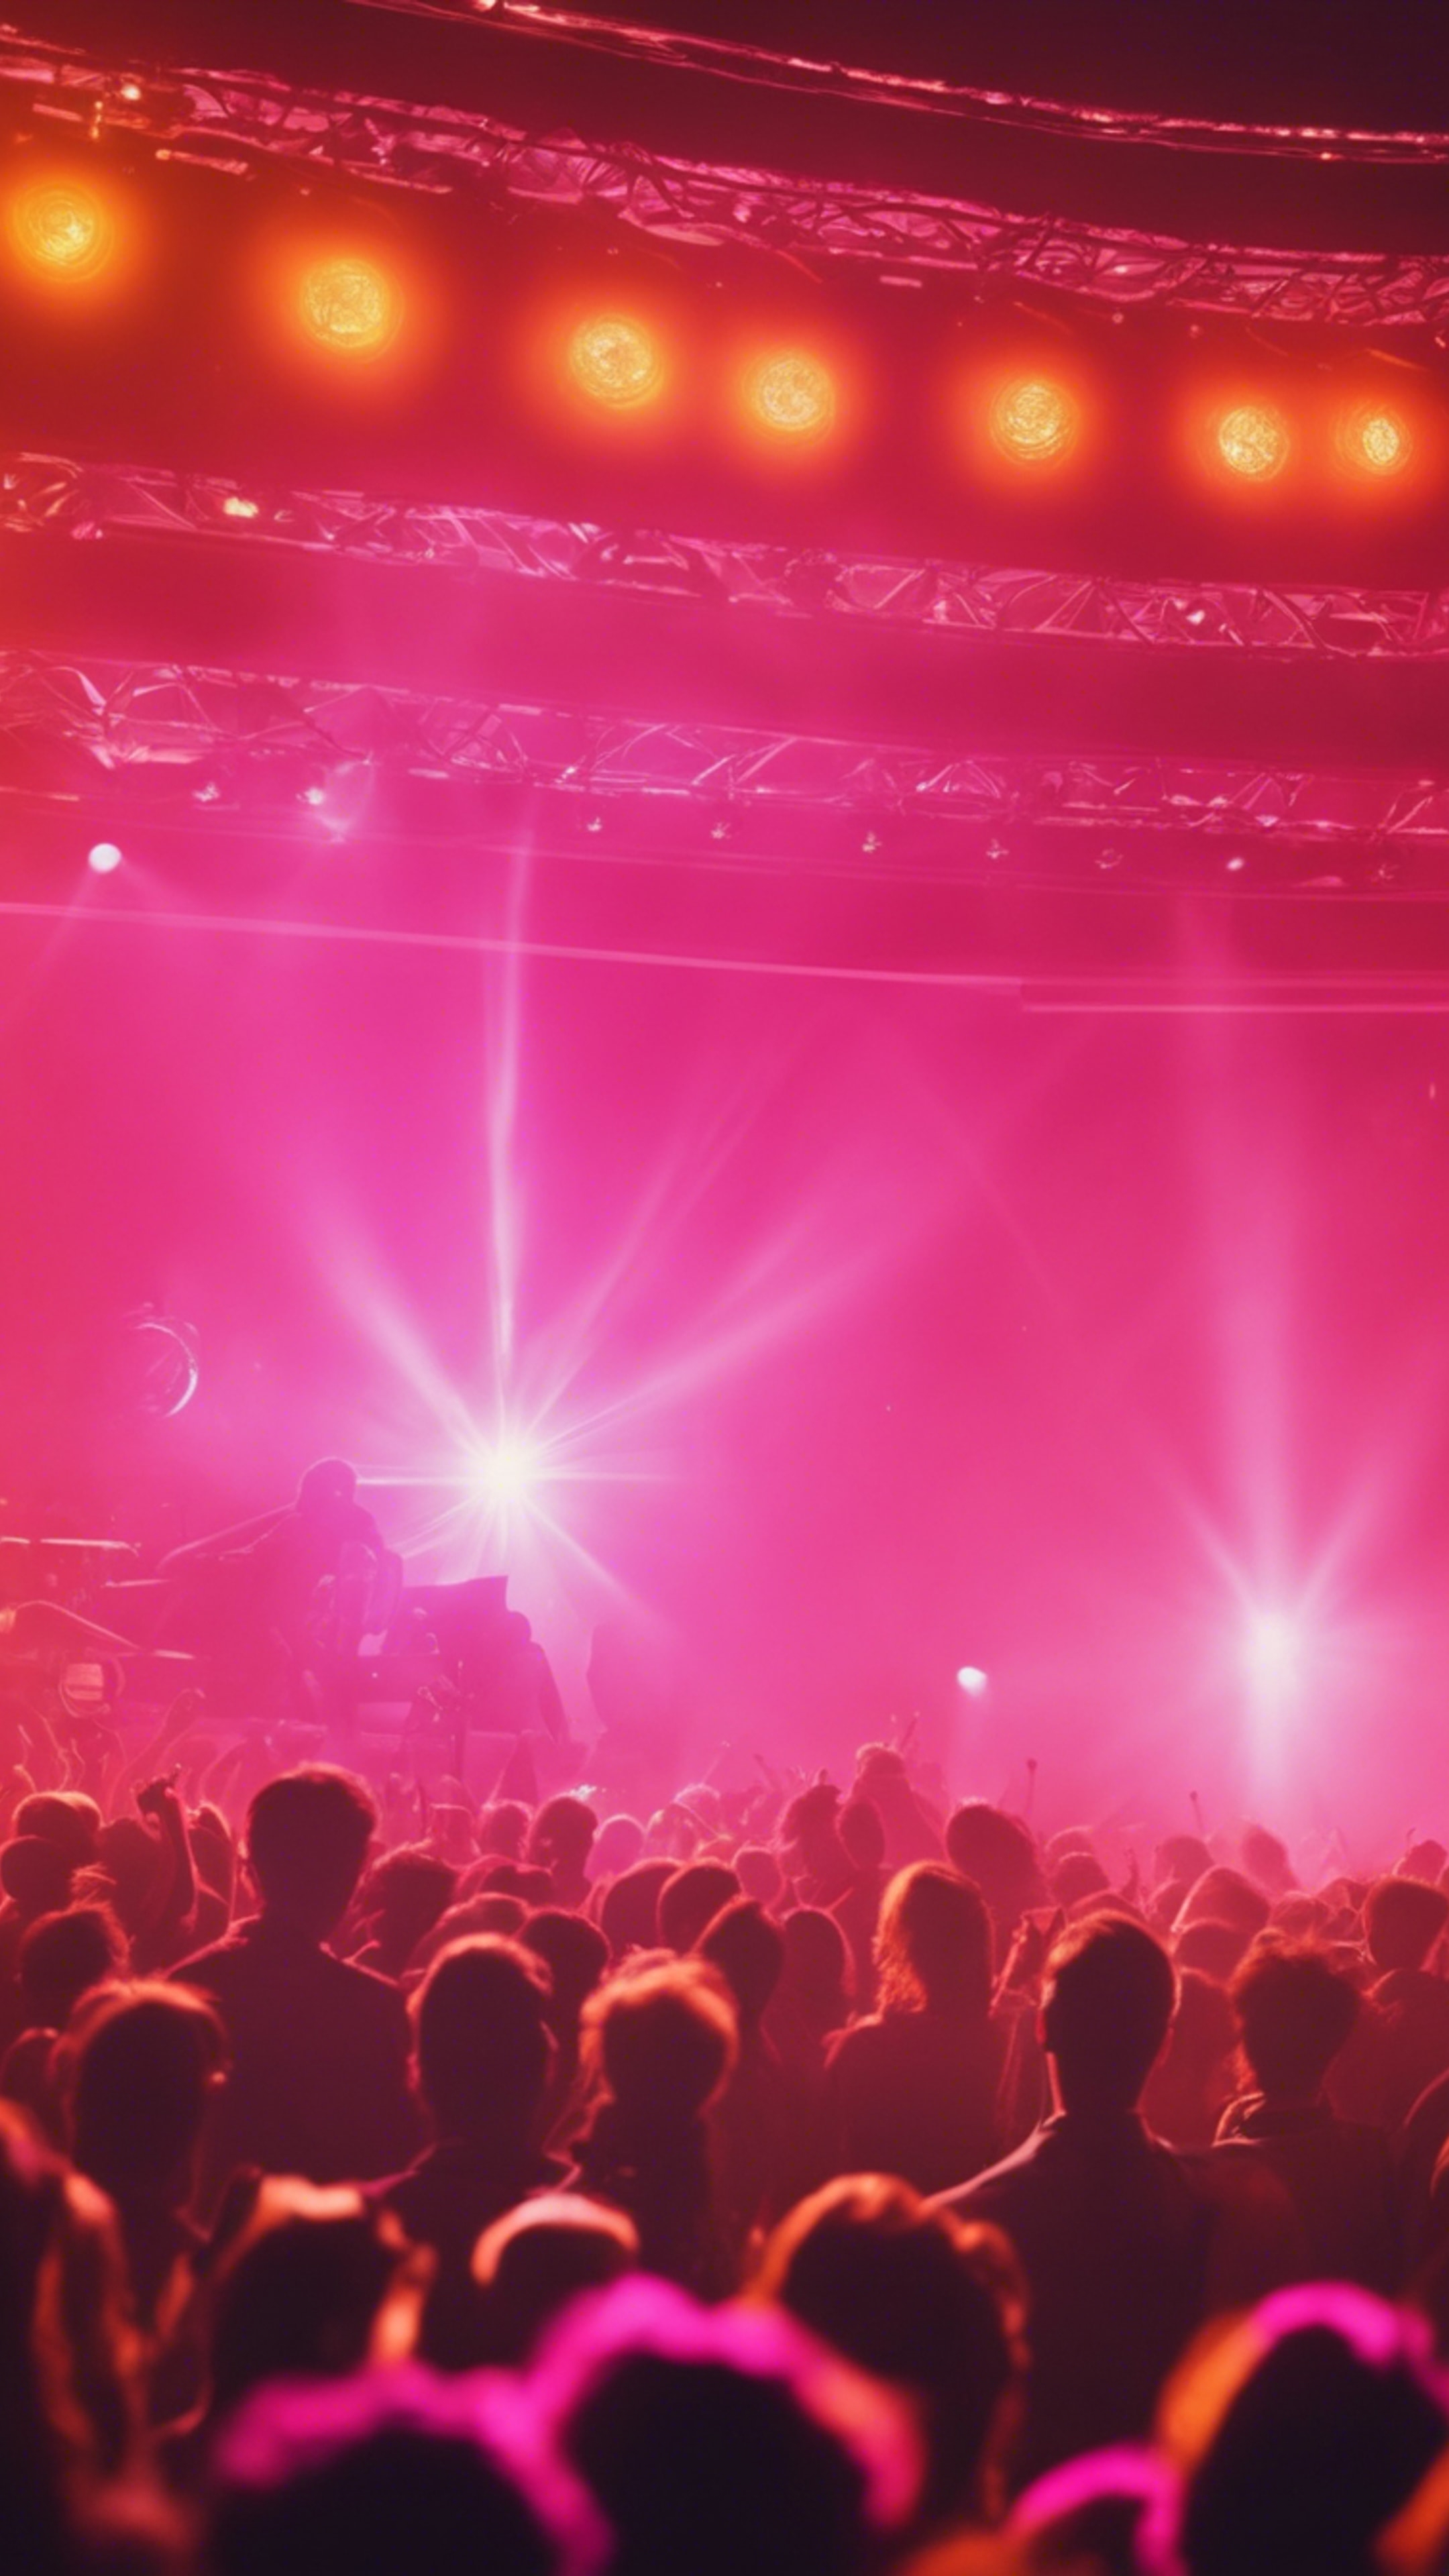 Bright orange flares from an 80s music concert with a pink stage lighting. Tapeta[6011018ba8cb439fb9ea]